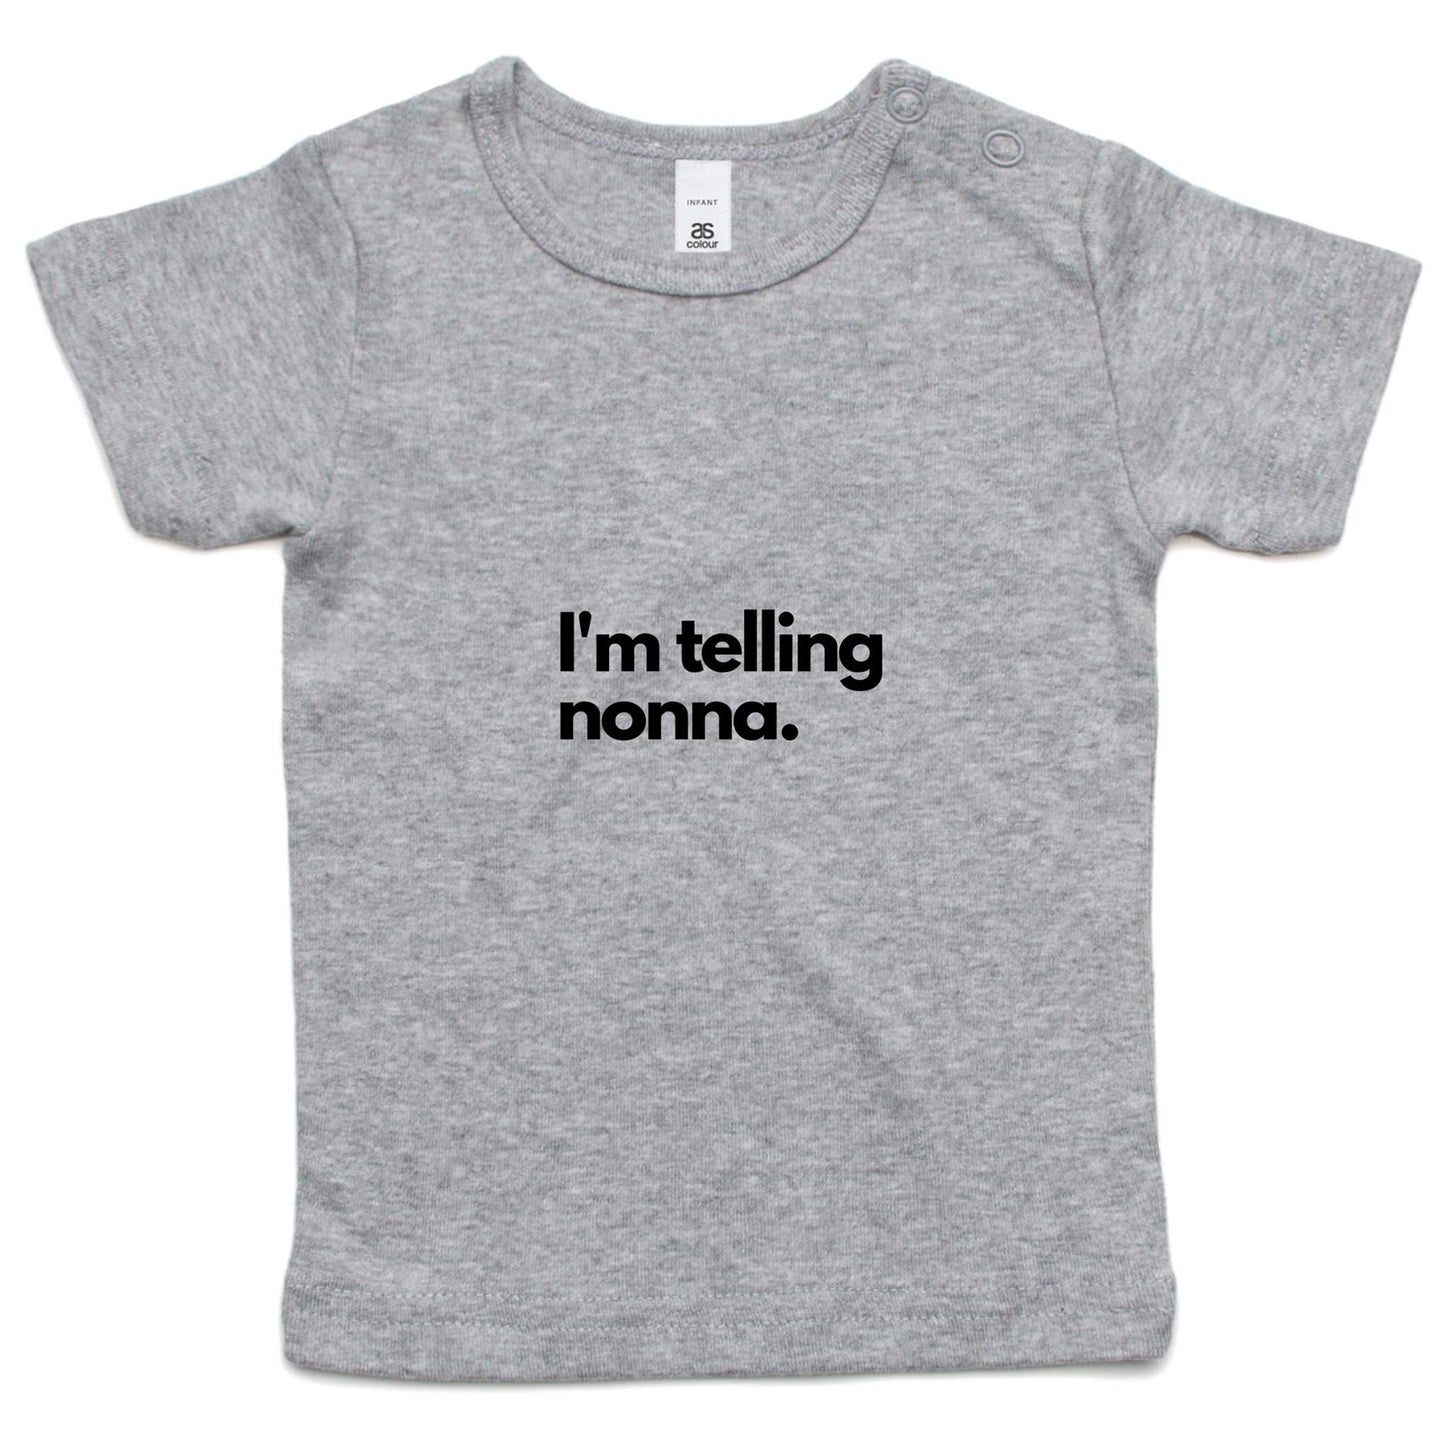 Telling nonna- Infant Wee Tee